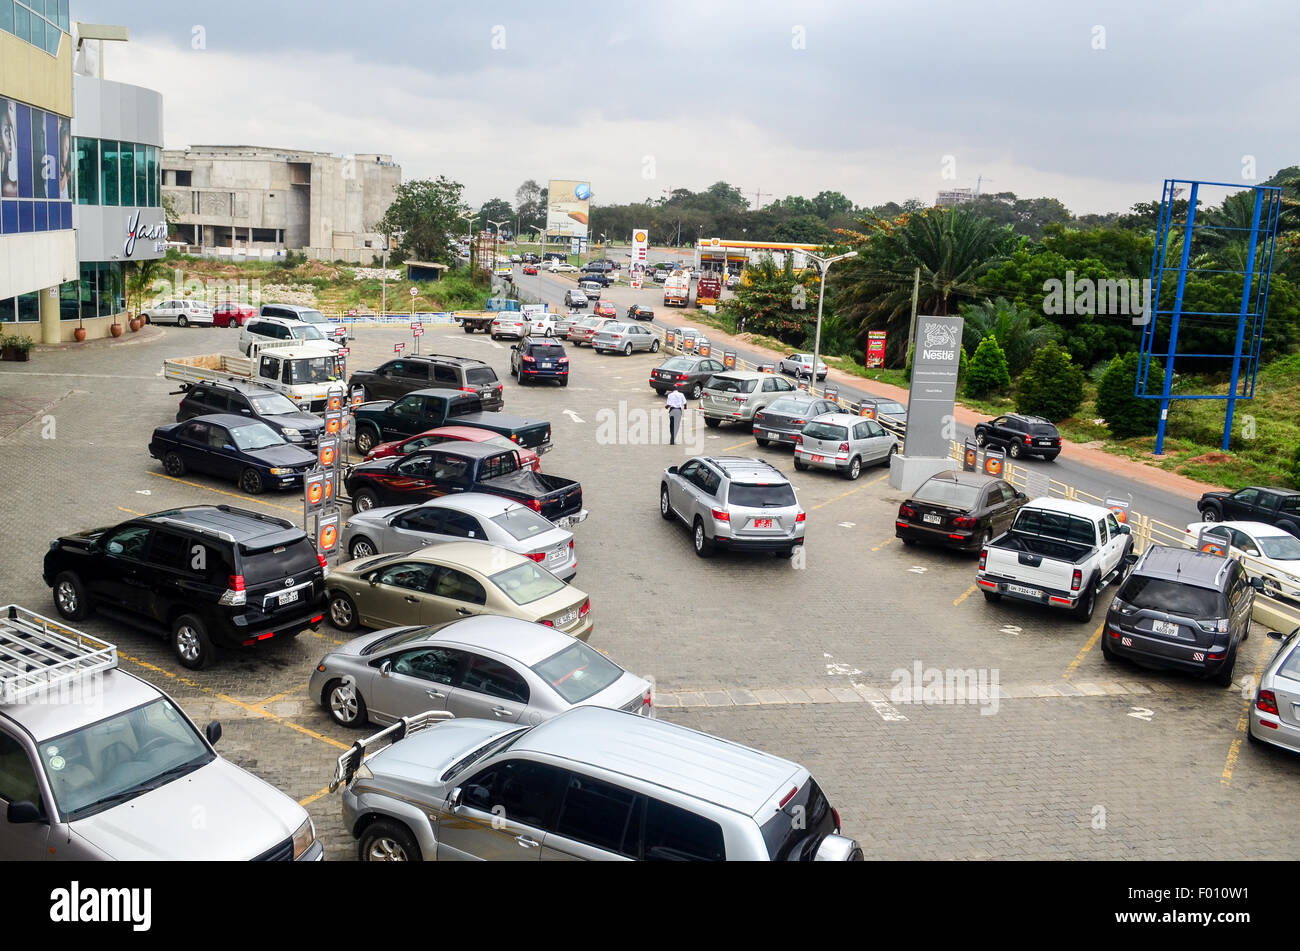 Fancy and luxury cars parked near a mall in the posh suburbs of Accra, Ghana Stock Photo